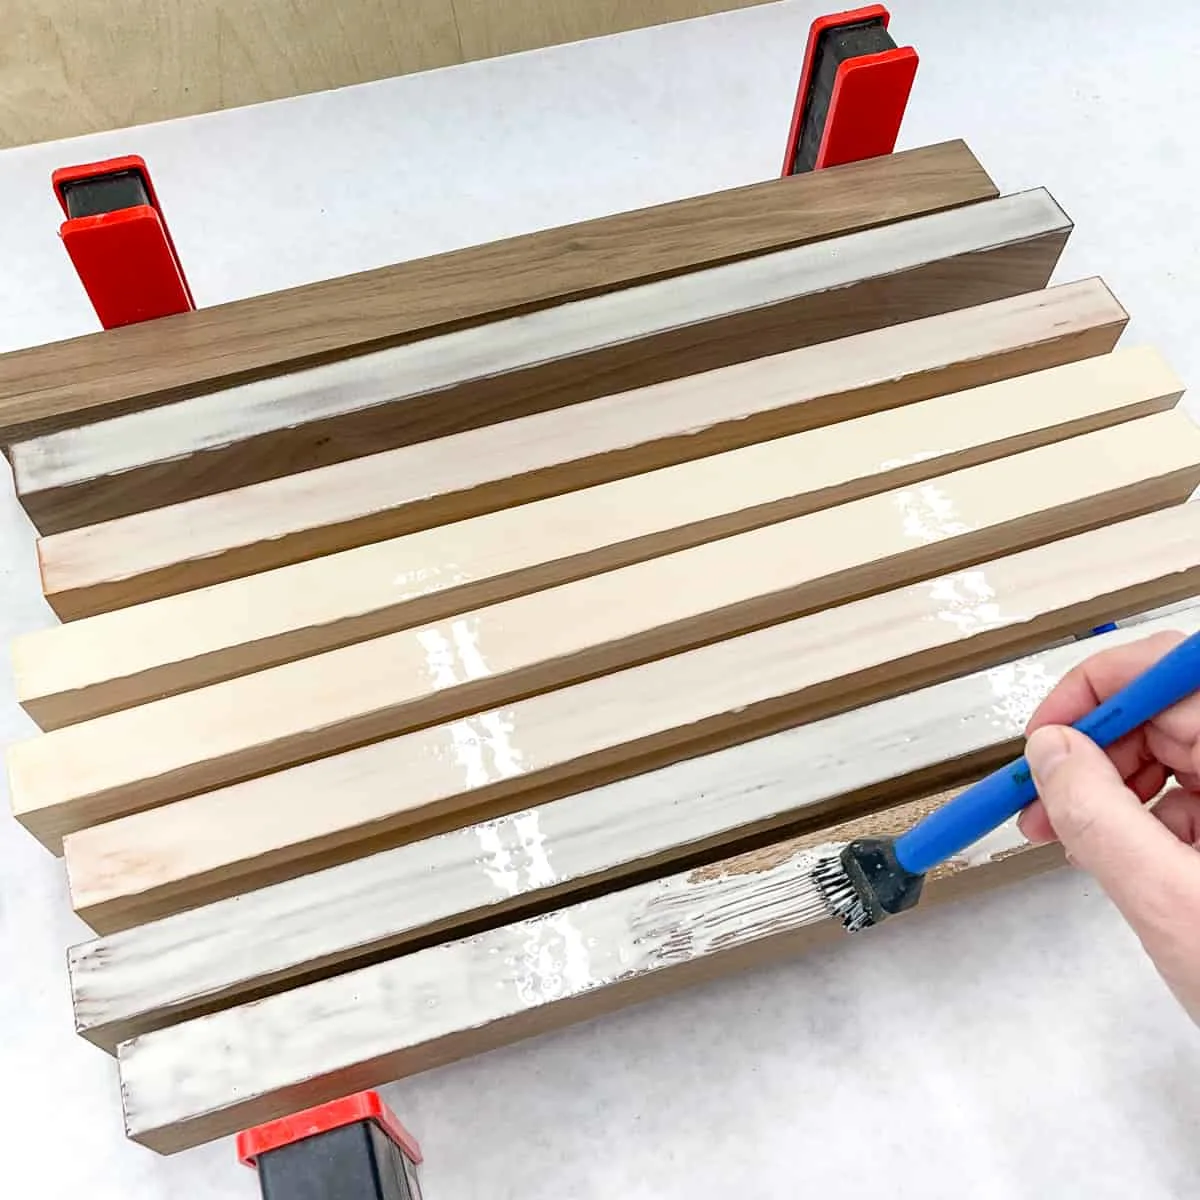 applying wood glue between joints in cutting board